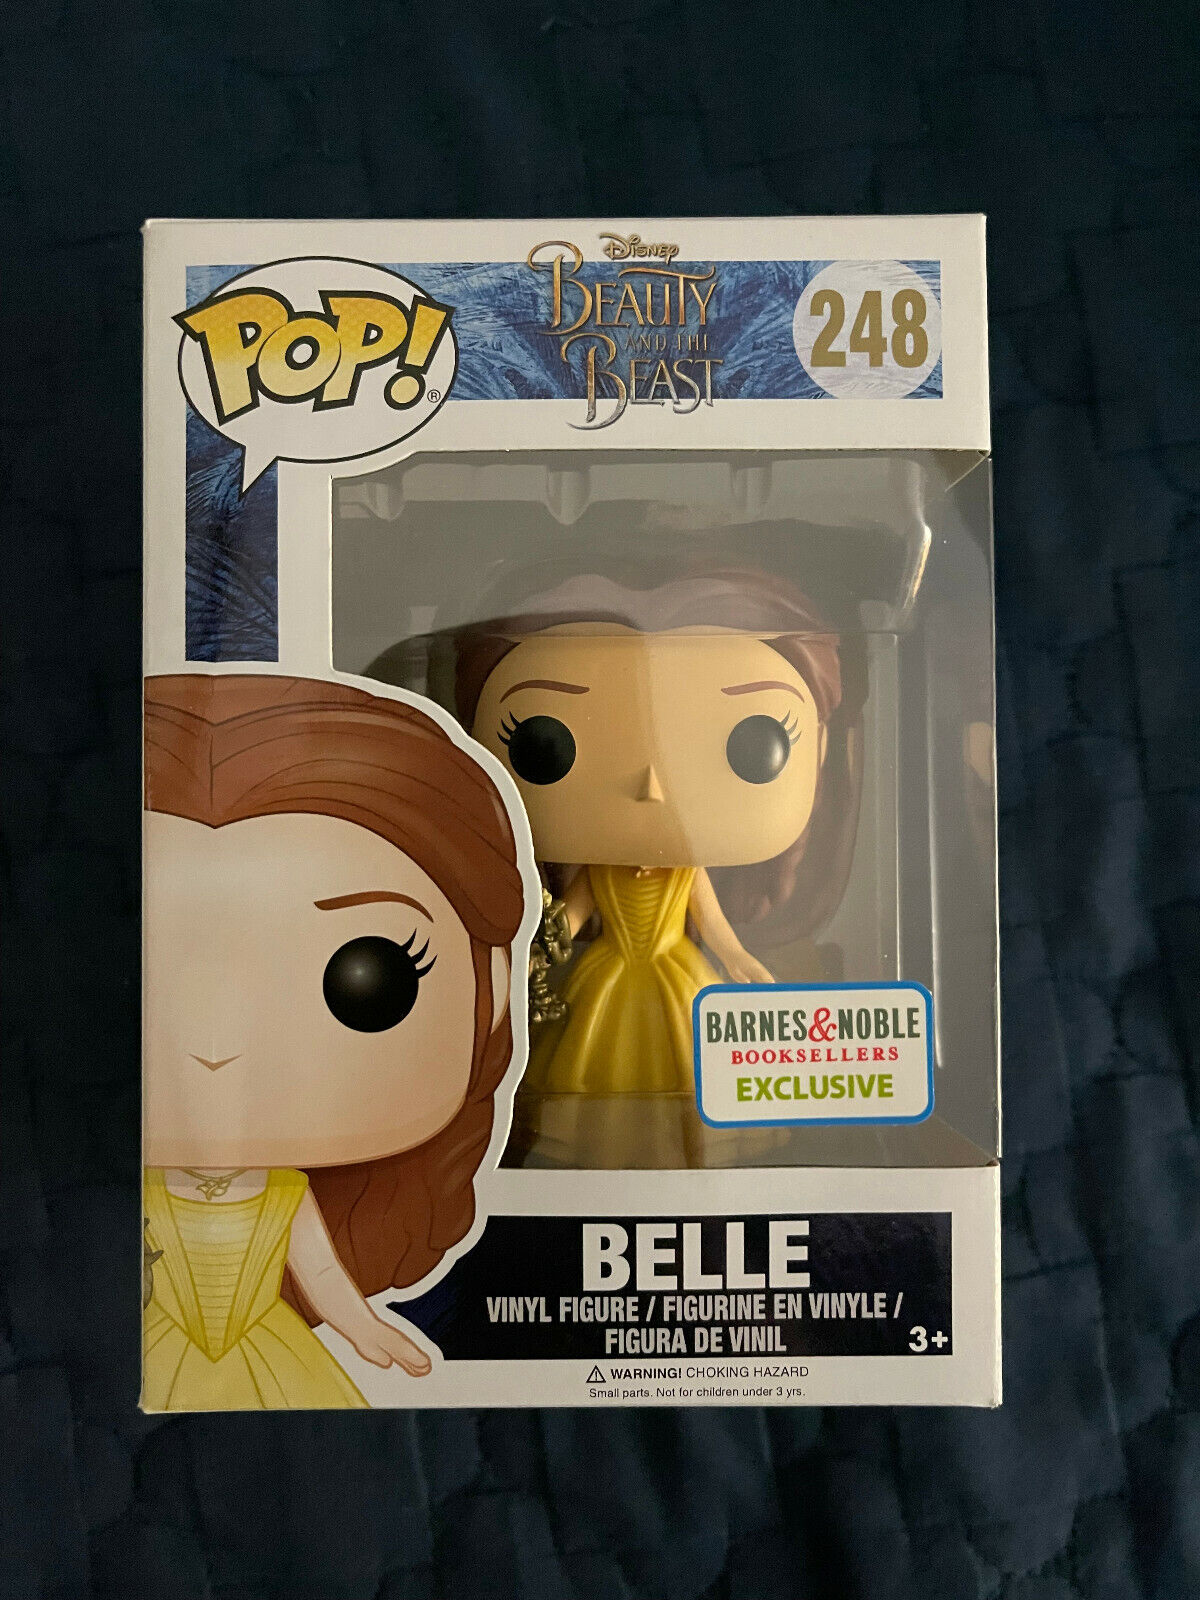 Funko Pop Disney Beauty and the Beast #248 Belle Barnes and Noble Exclusive